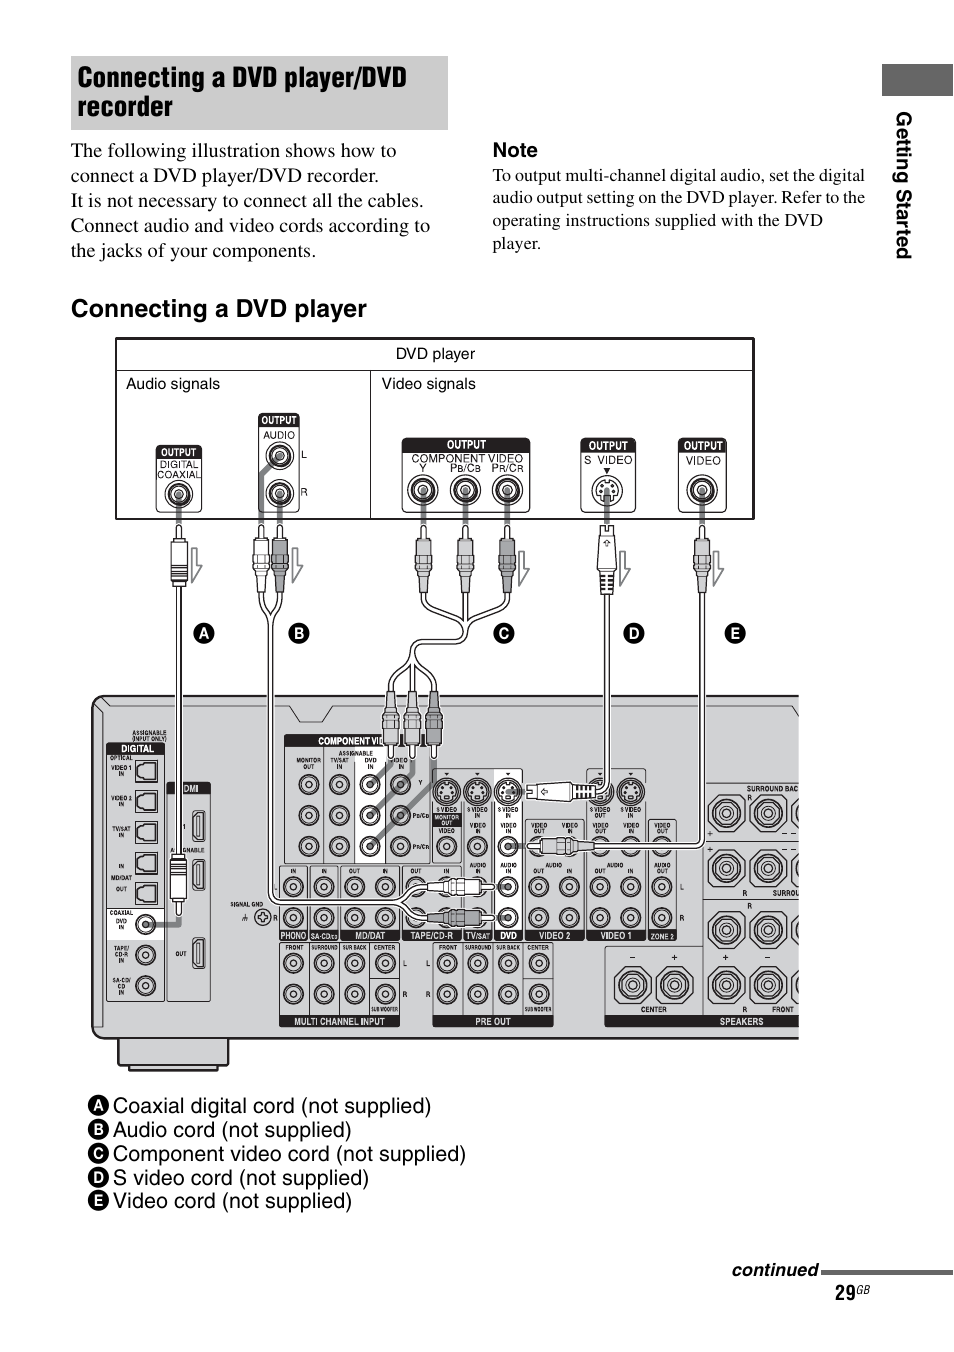 Connecting a dvd player/dvd recorder, Connecting a dvd player | Sony STR-DG1000 User Manual | Page 29 / 123